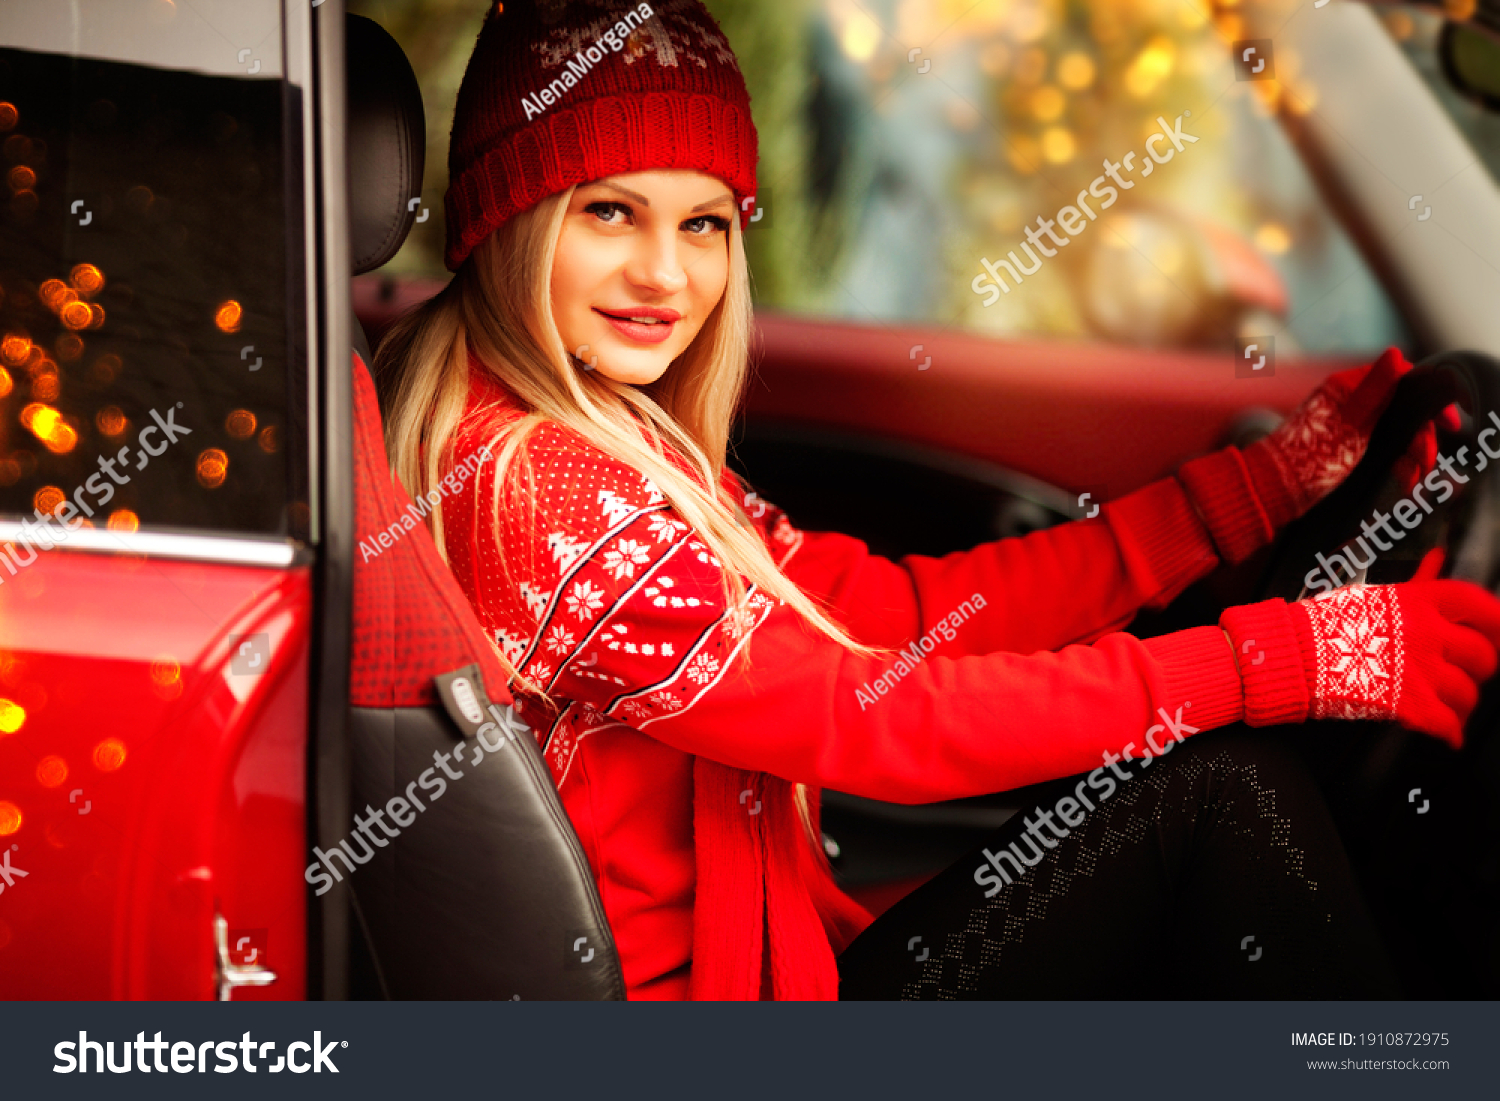 Rayons de soleil !  - Page 16 Stock-photo-young-pretty-snow-maiden-on-the-background-of-festive-decorations-and-a-red-car-with-gifts-and-1910872975